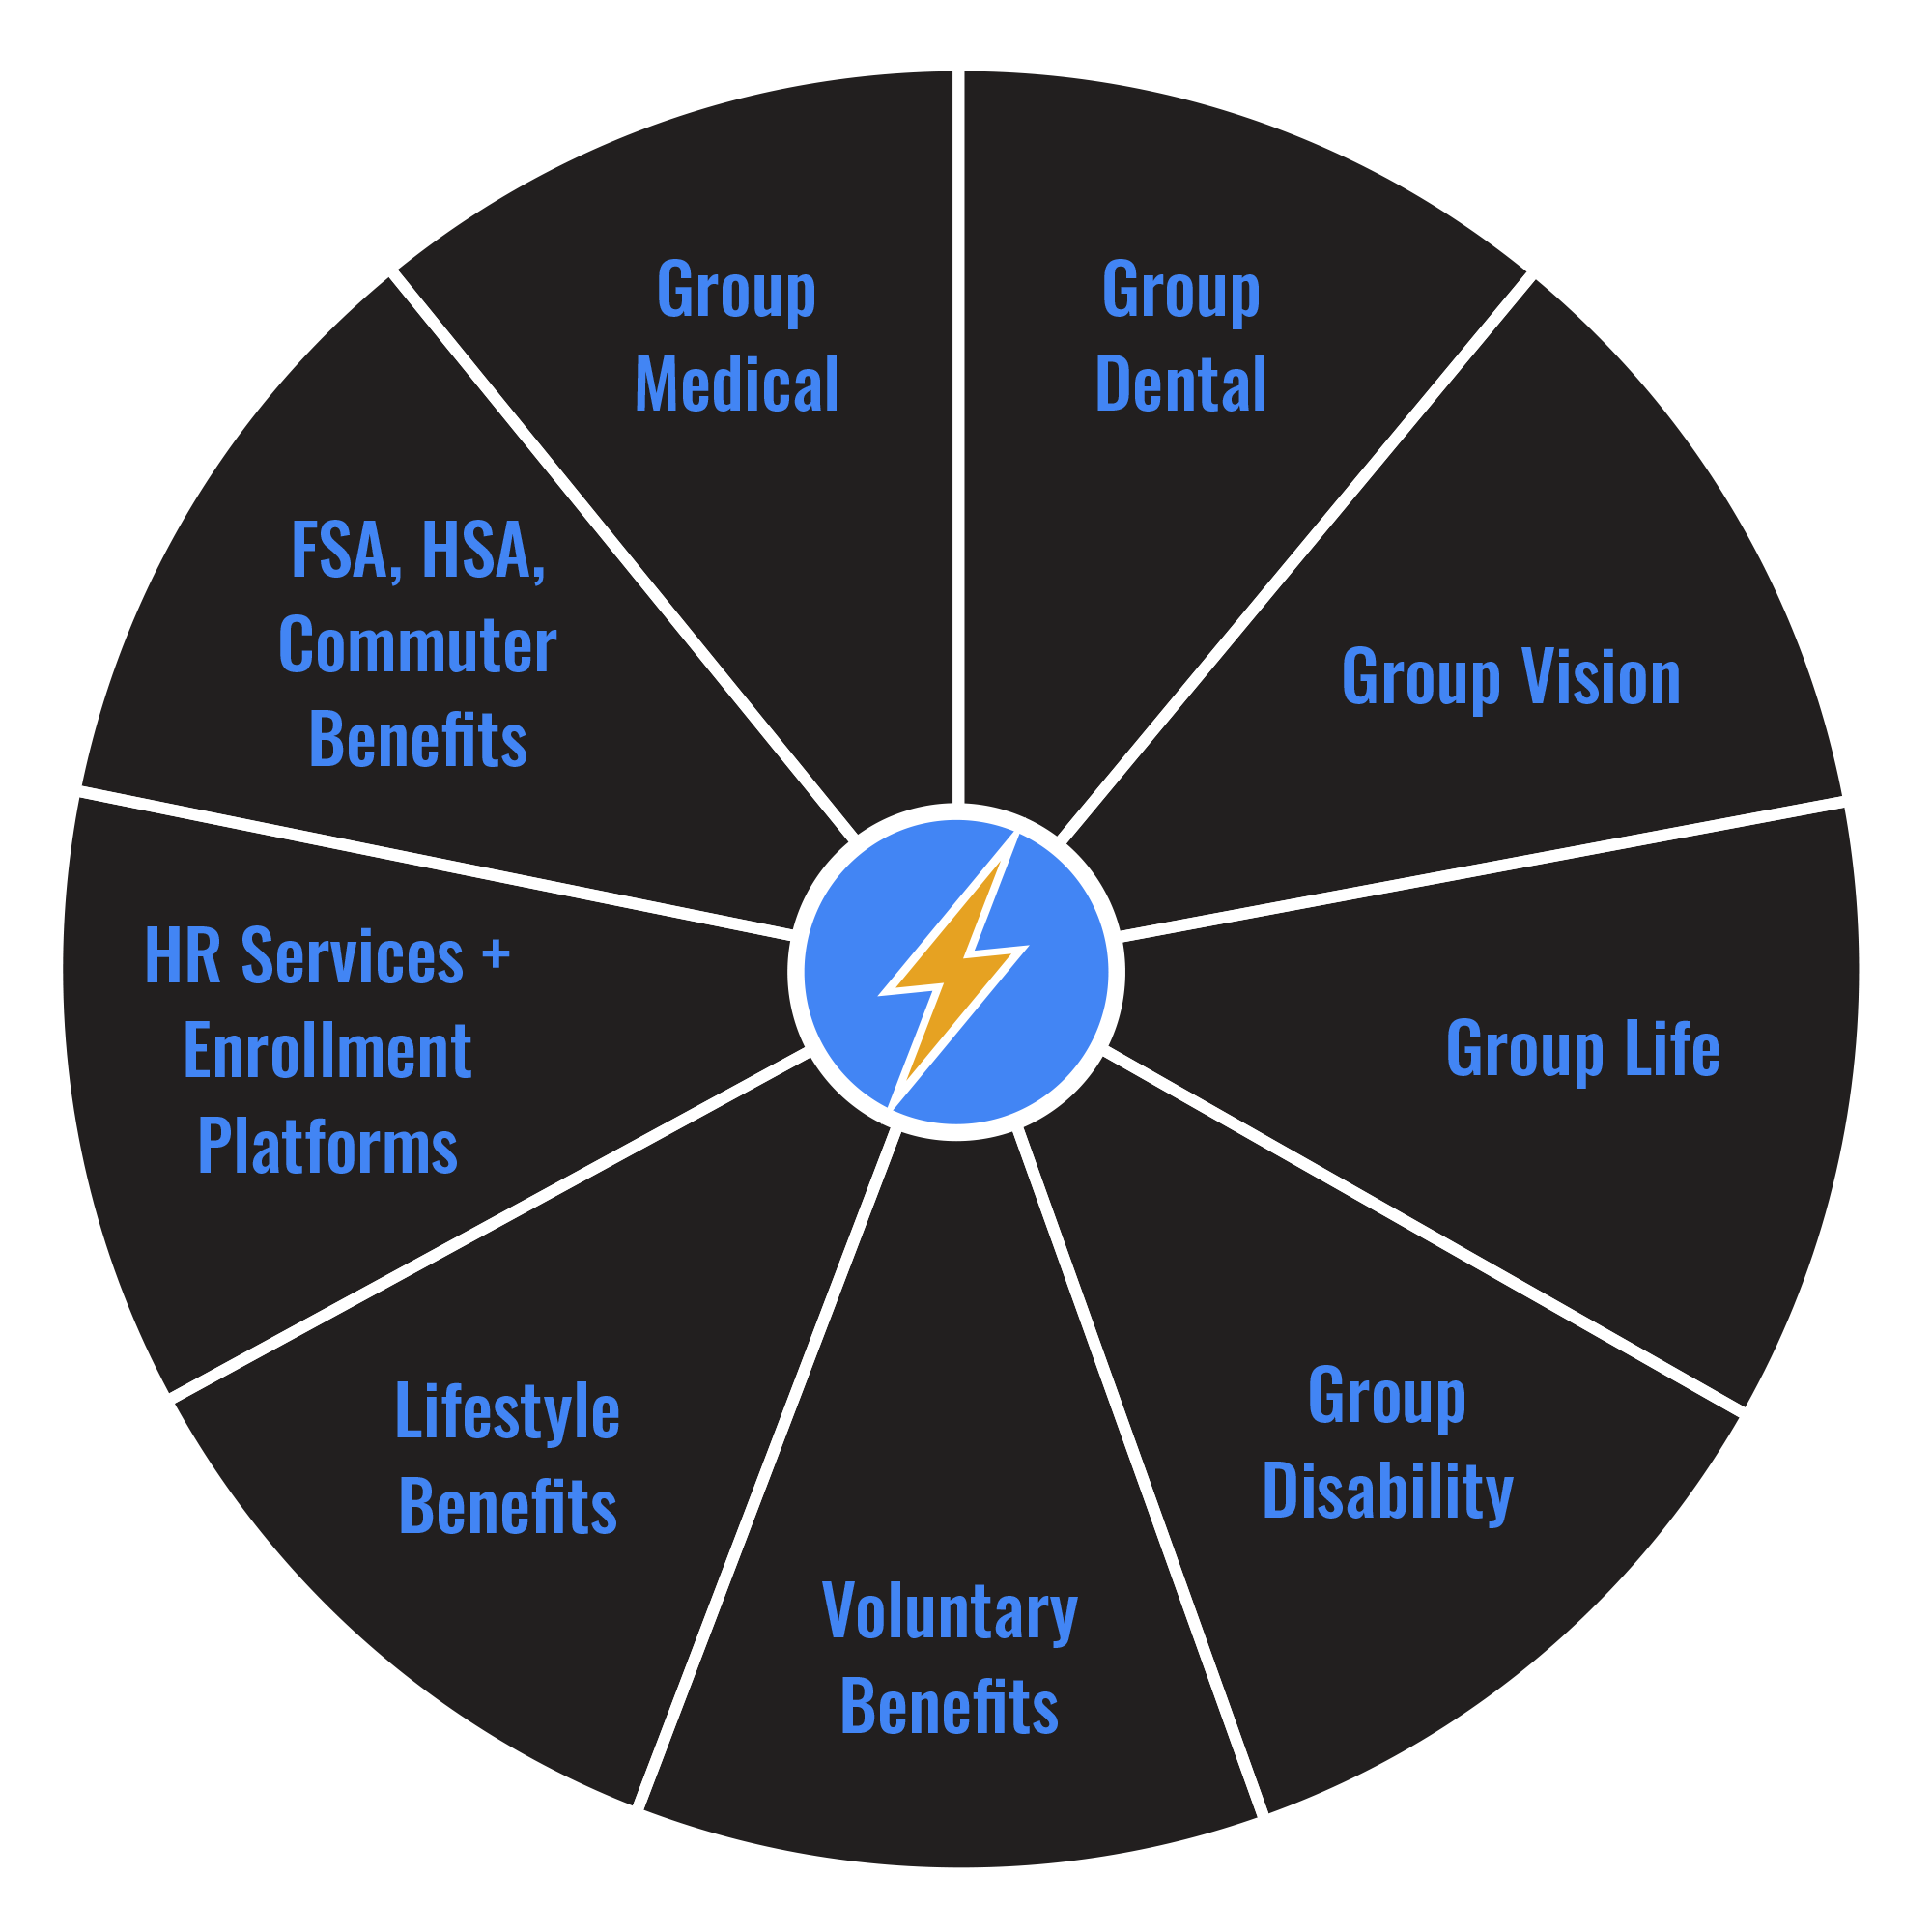 Employee Benefits /wp-content/uploads/2021/05/CoverEase_CoverageWheel-1.png